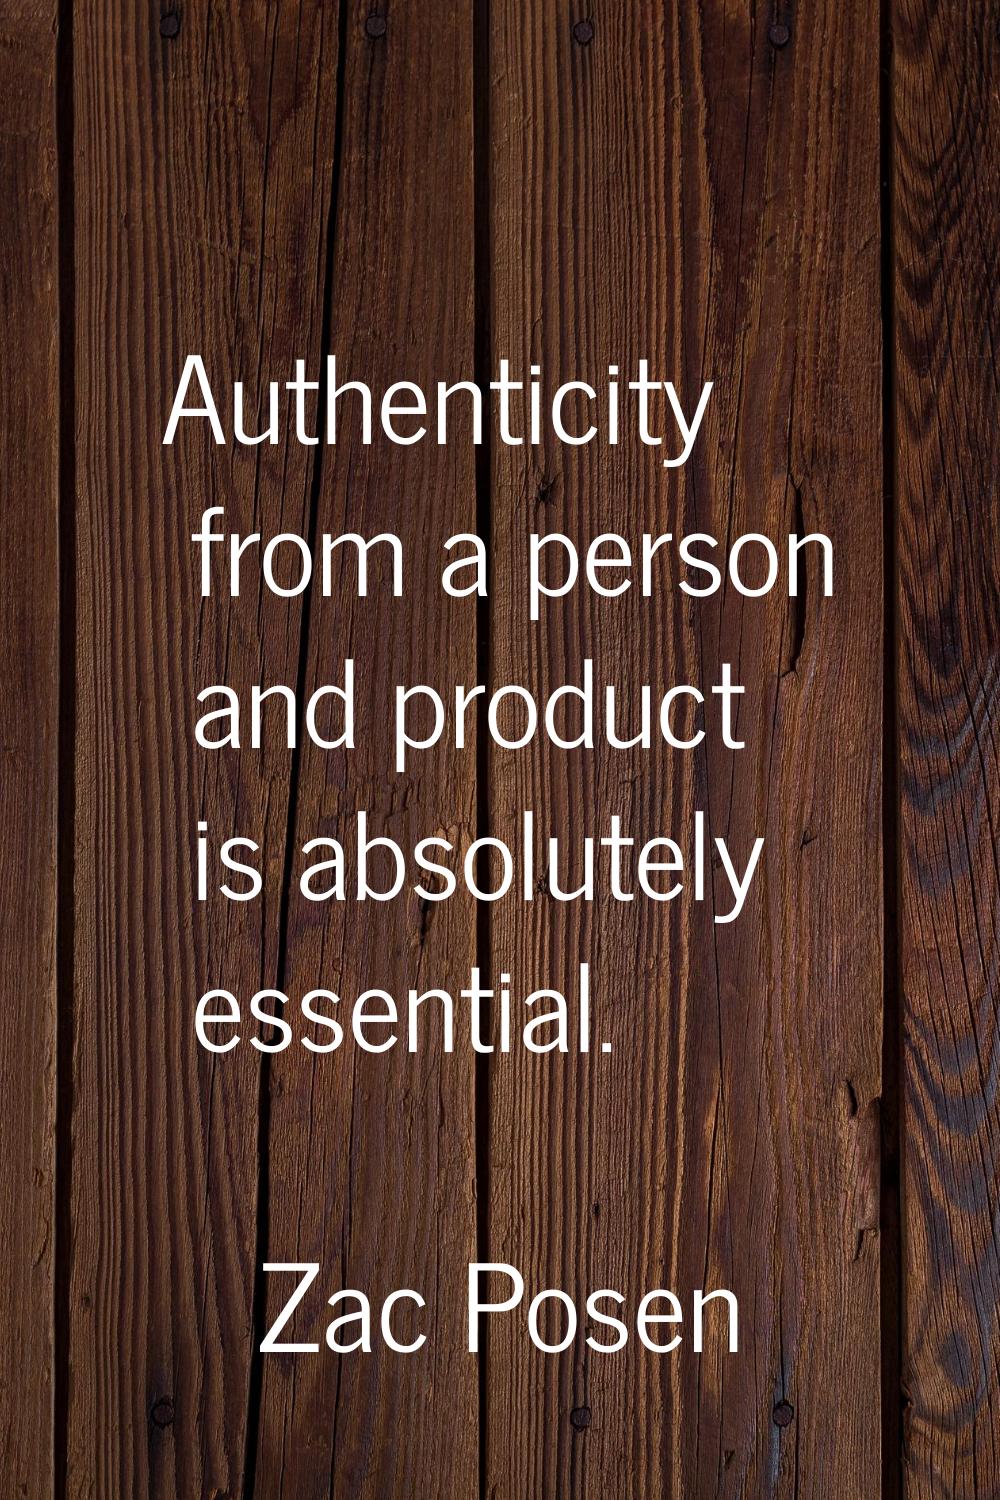 Authenticity from a person and product is absolutely essential.